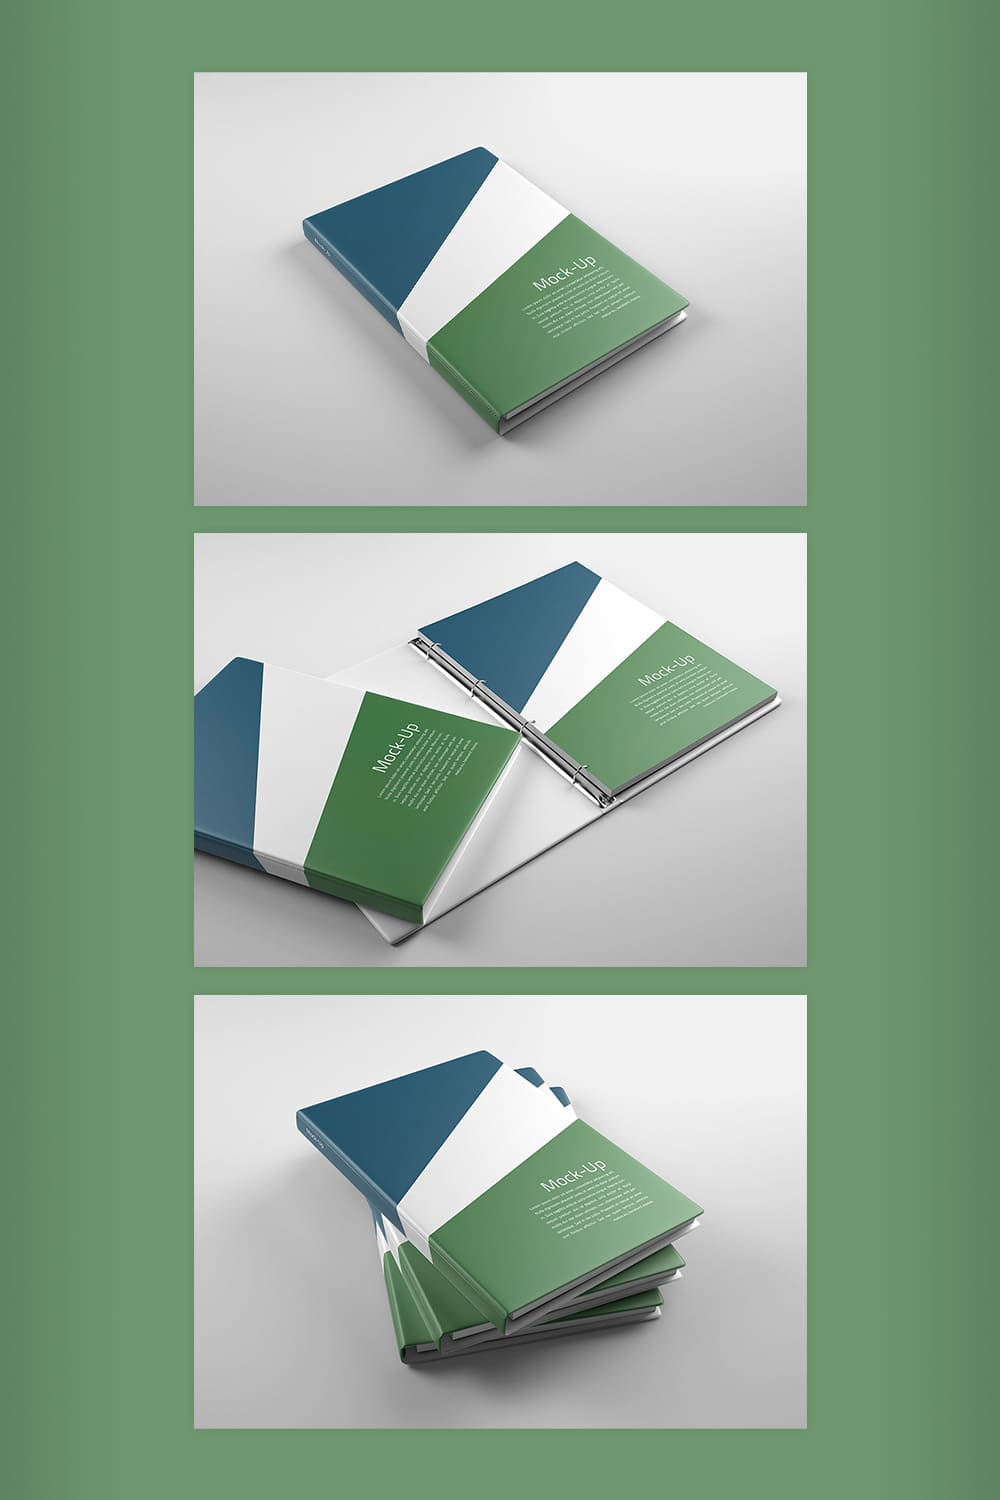 Ring binder image pack with lovely design.